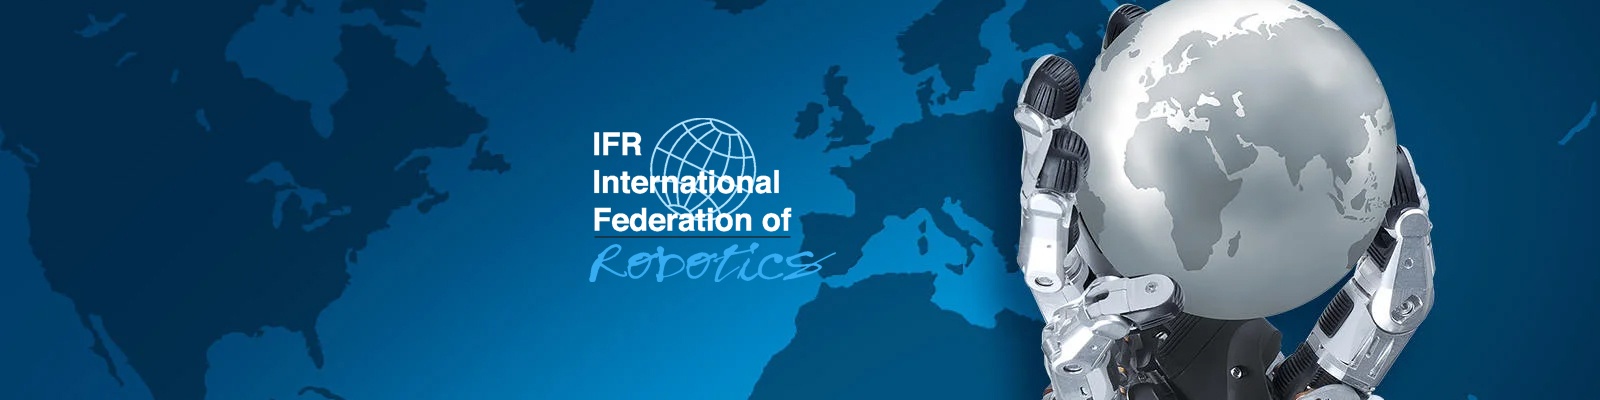 IFR Press Release